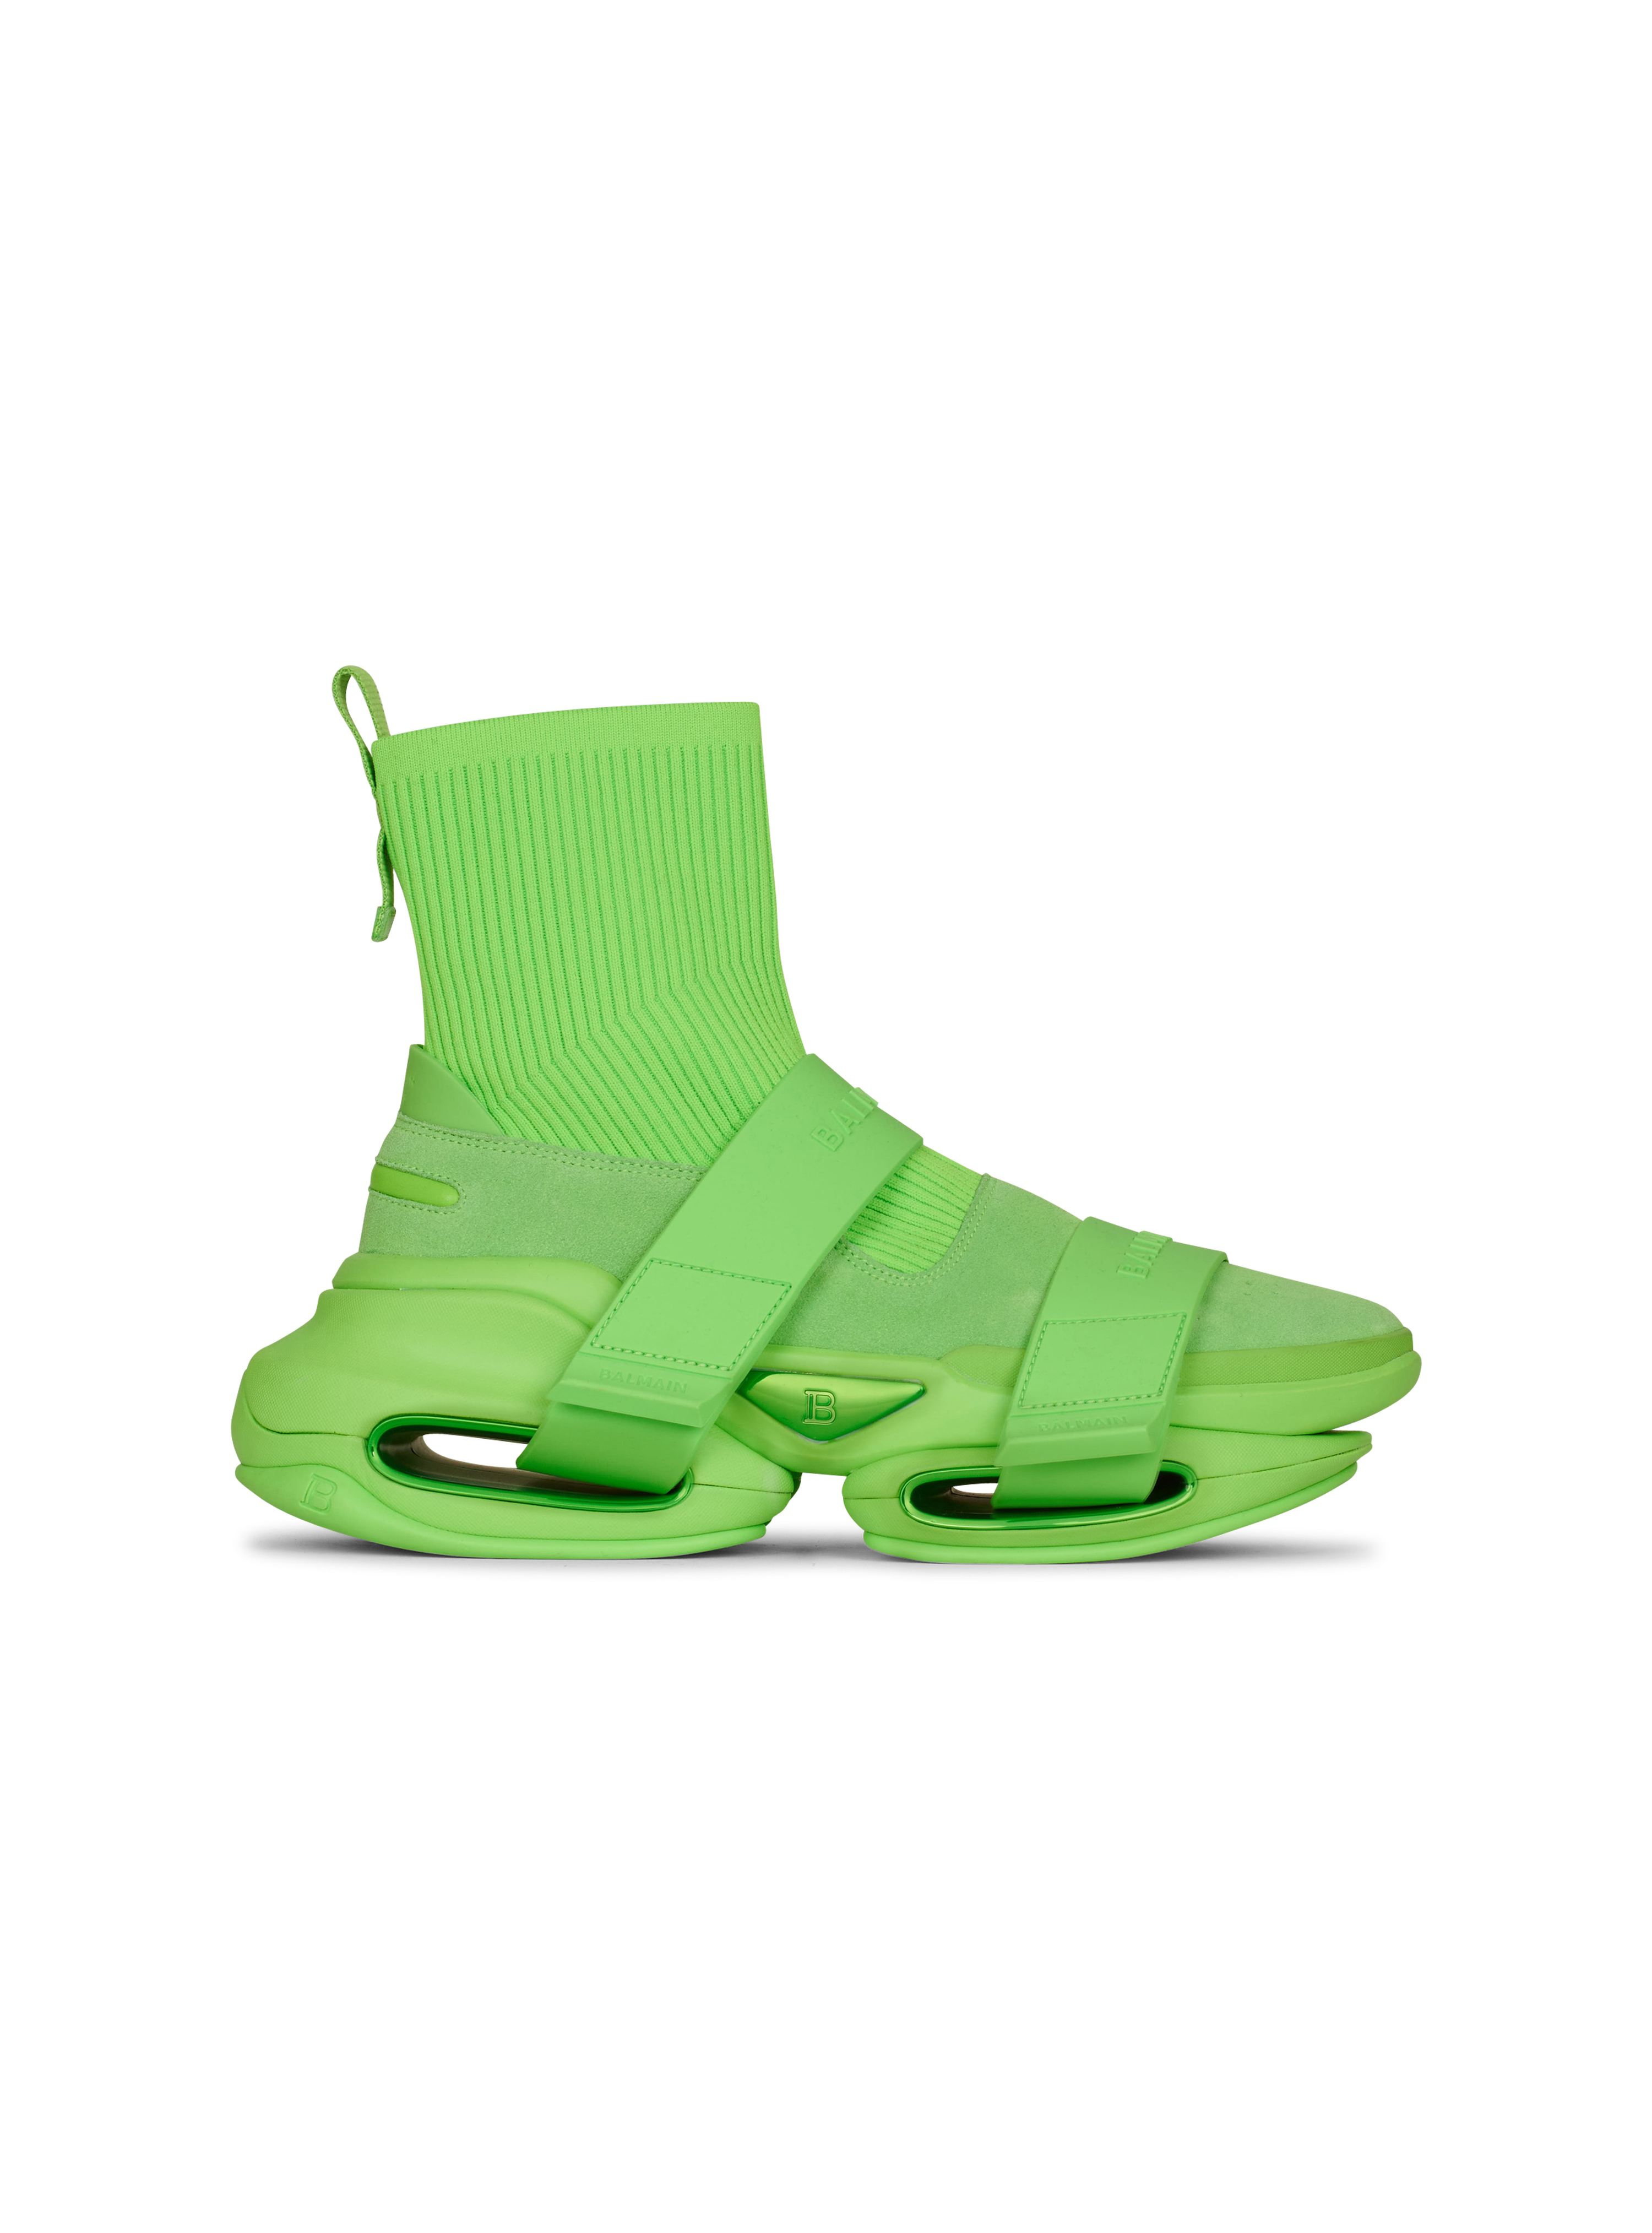 Neoprene and knit B-Bold high-top sneakers with straps, green, hi-res